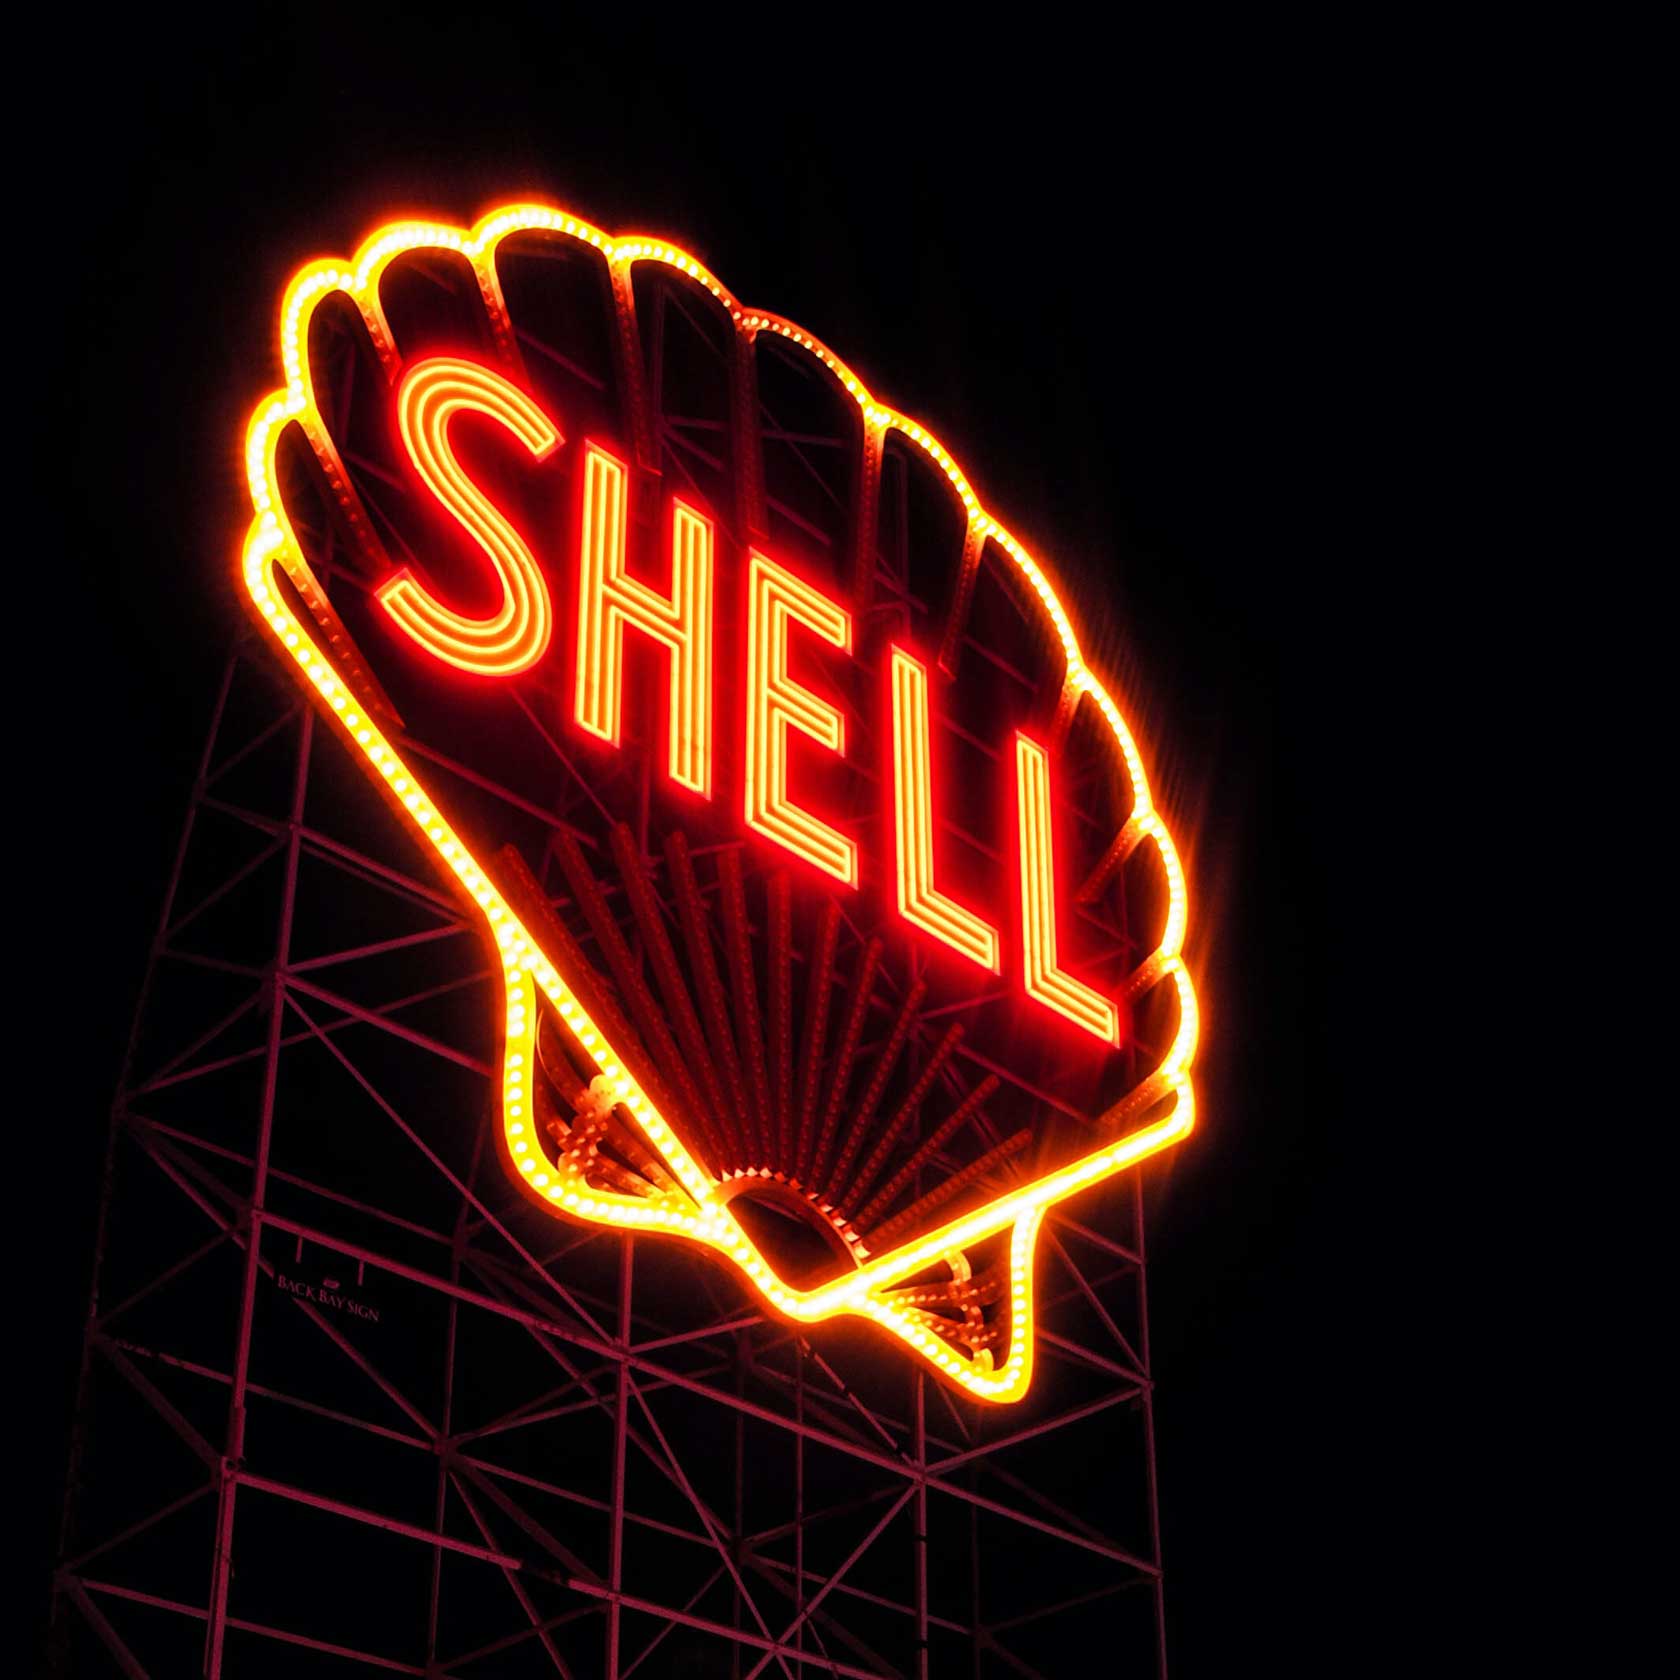 A Vintage Neon Shell Sign From Years Past The Revival Of Collecting Vintage Signs